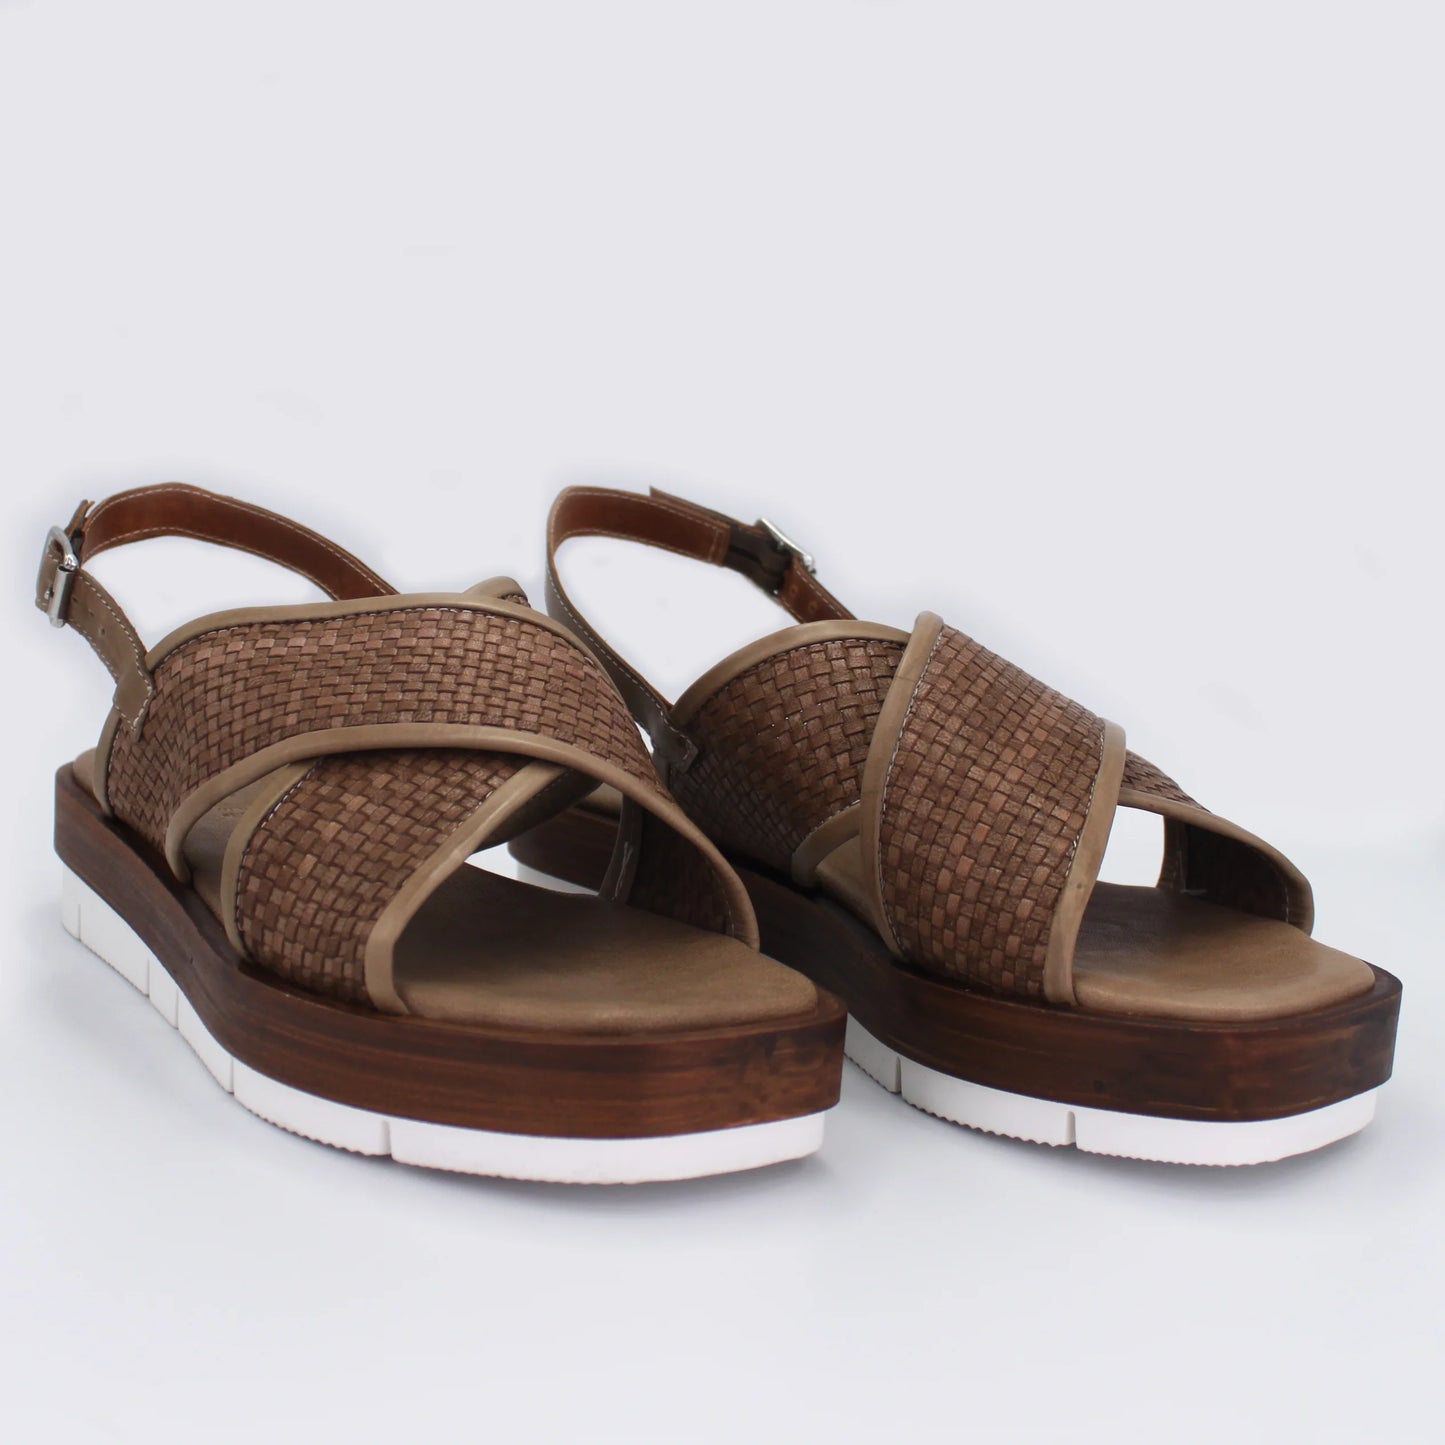 Shop Handmade Italian Leather Strap Sandals in Brown (13033) or browse our range of hand-made Italian sandals for women in leather or suede in-store at Aliverti Durban or Cape Town, or shop online. We deliver in South Africa & offer multiple payment plans as well as accept multiple safe & secure payment methods.